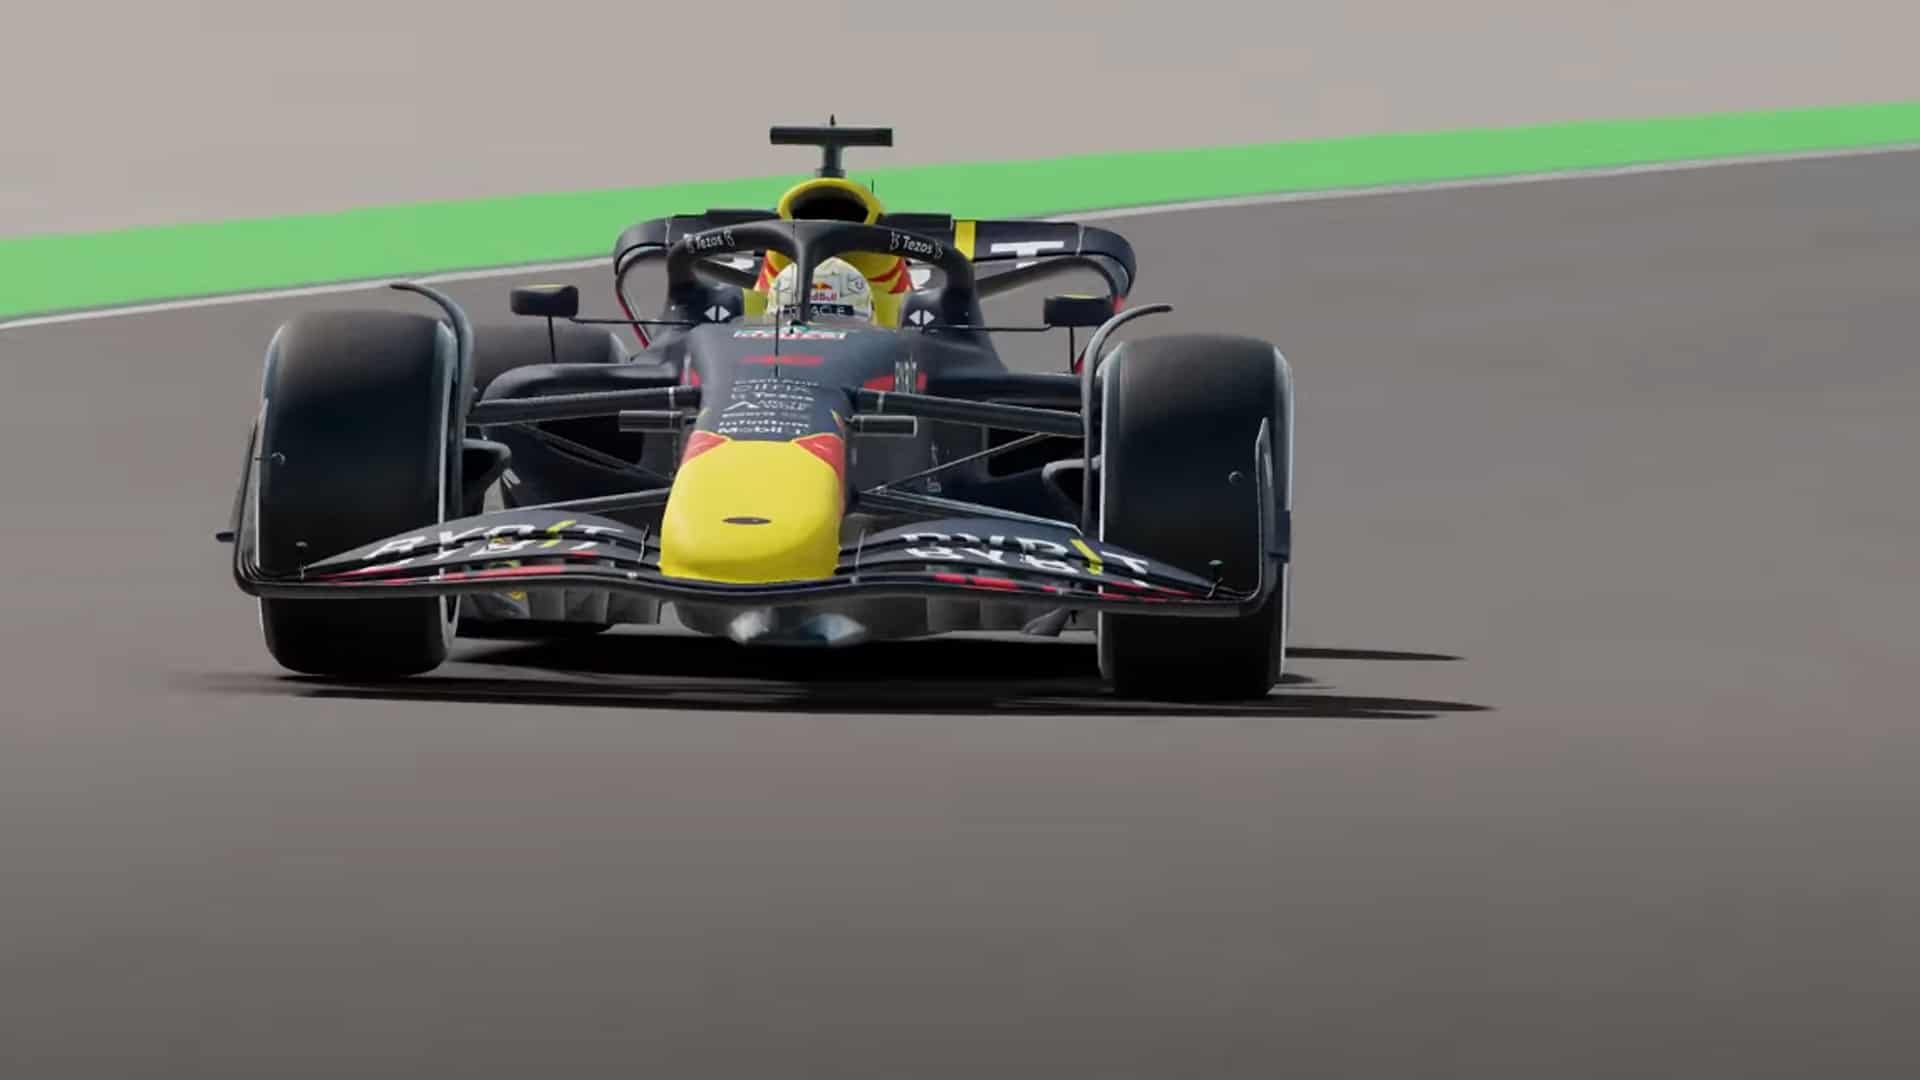 The 2022 season is now within F1 Mobile Racing